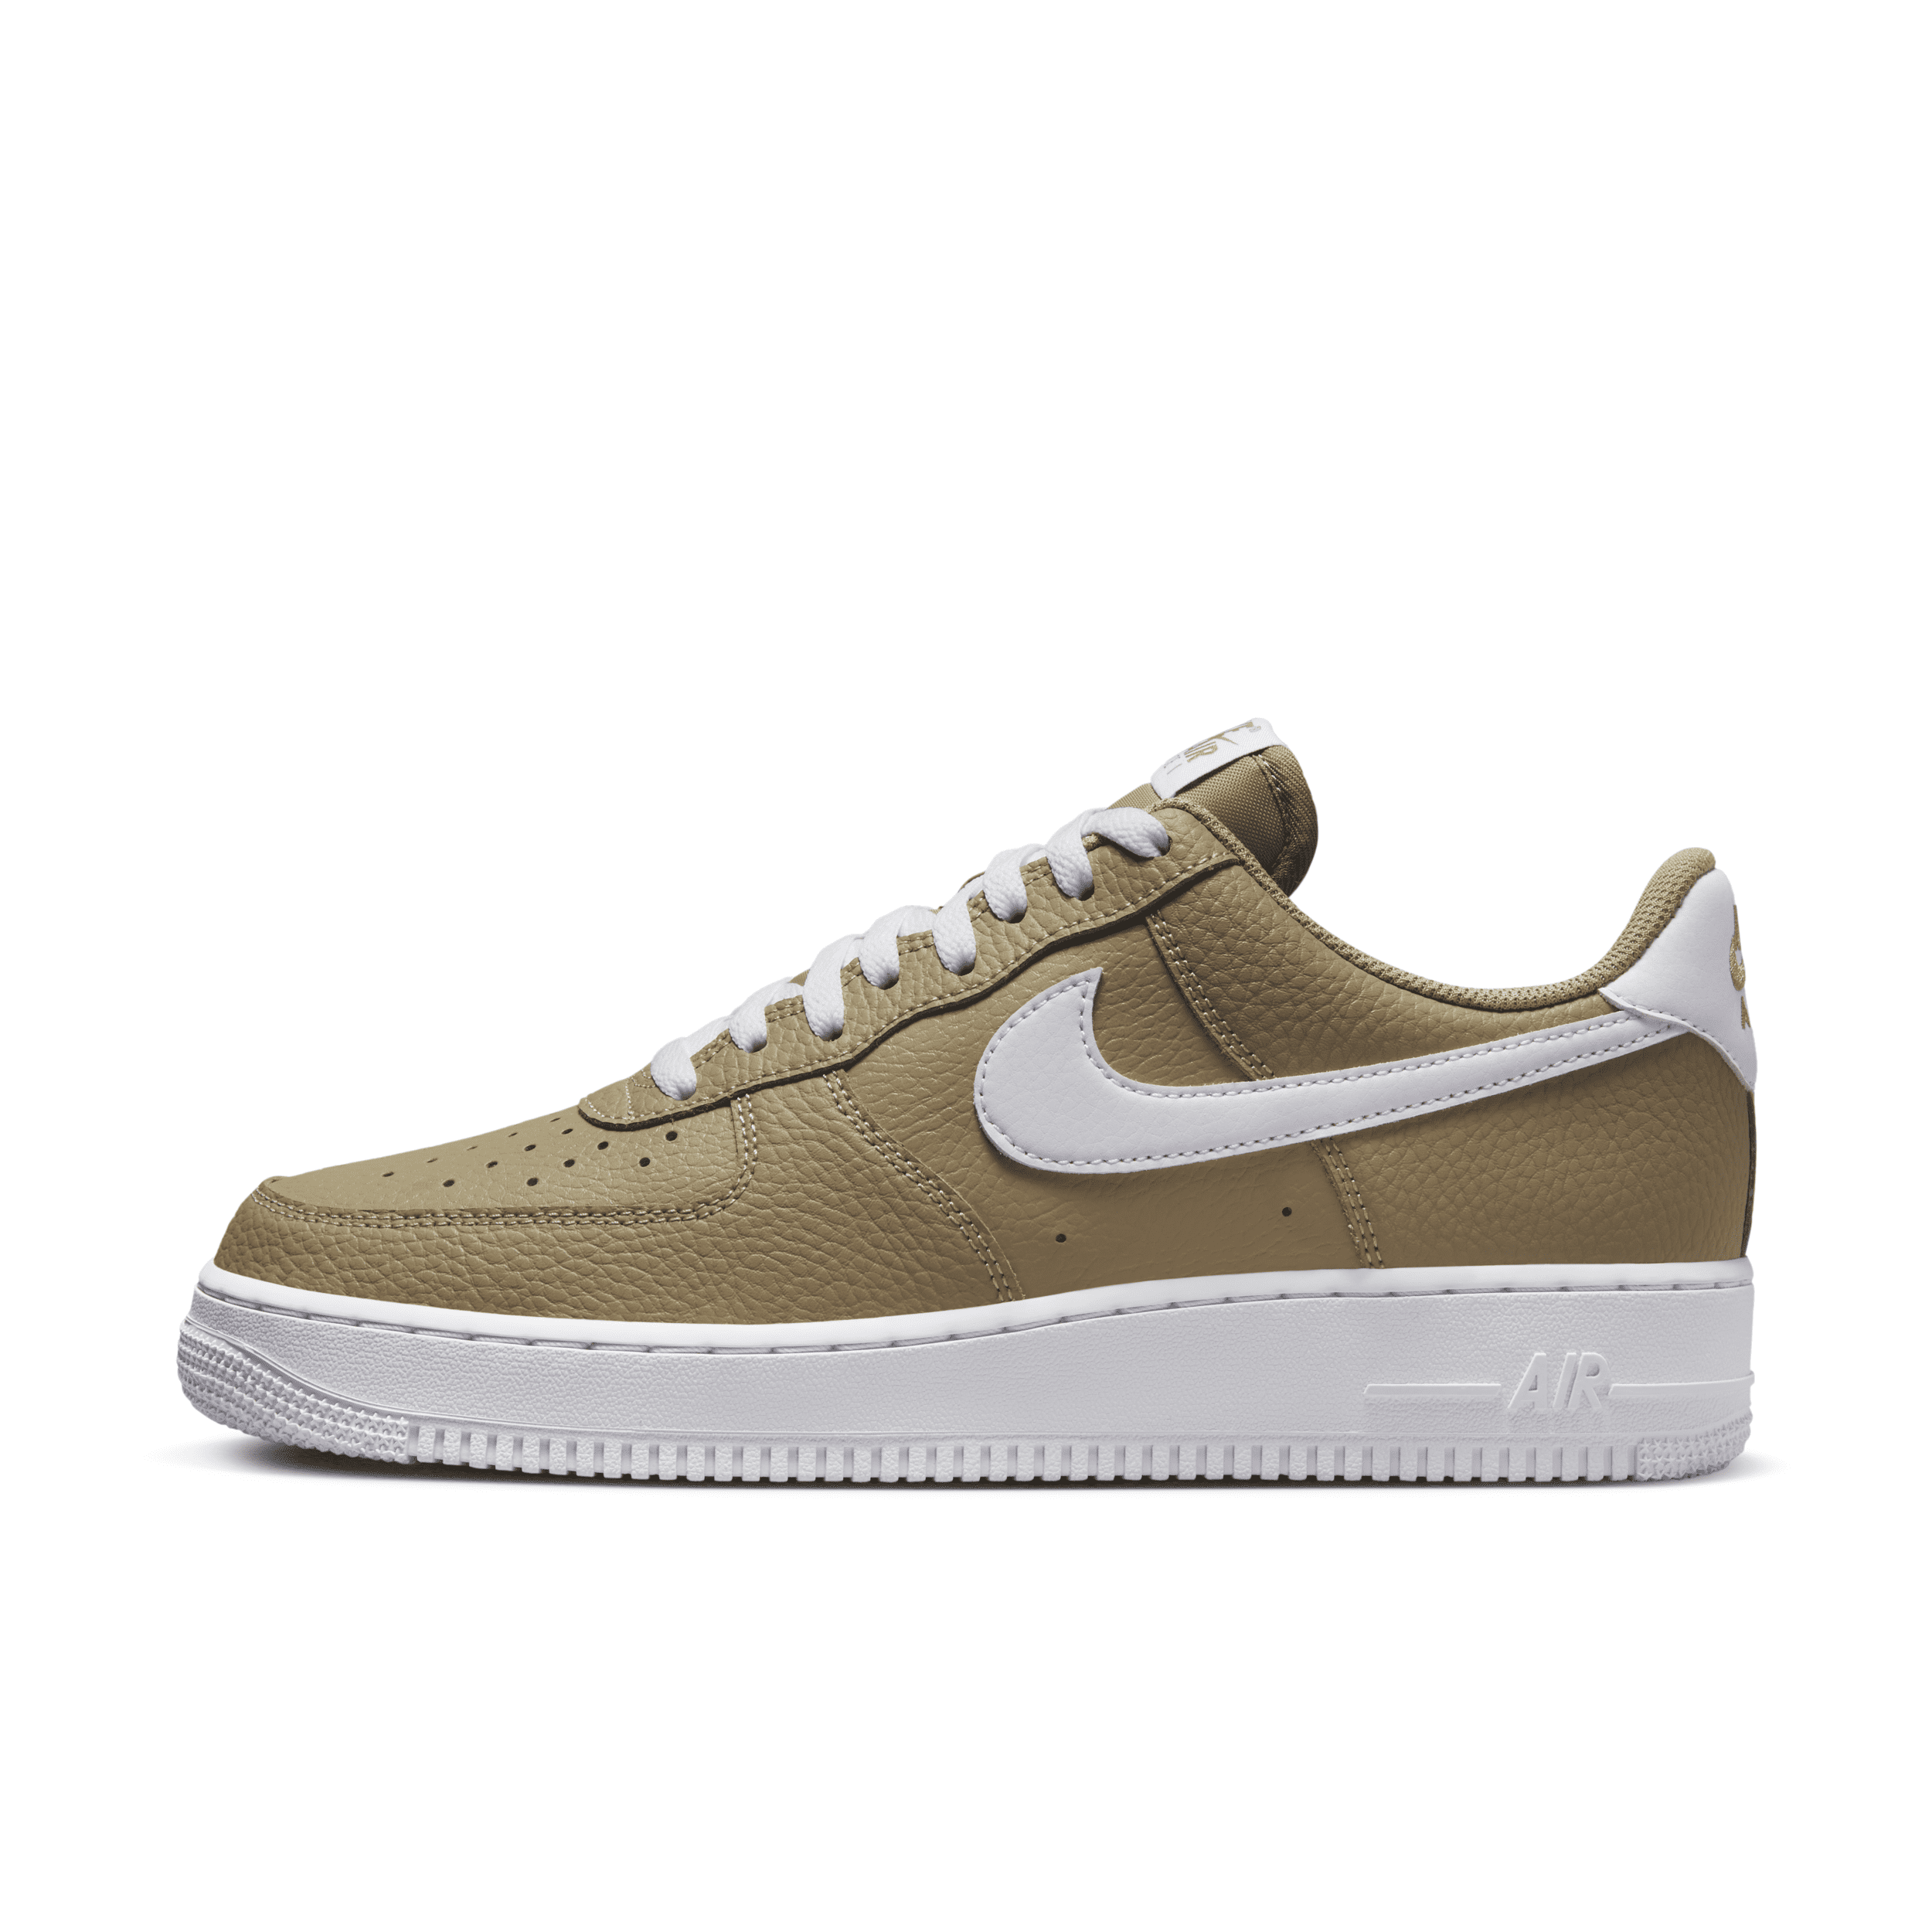 NIKE MEN'S AIR FORCE 1 '07 SHOES,1000197443